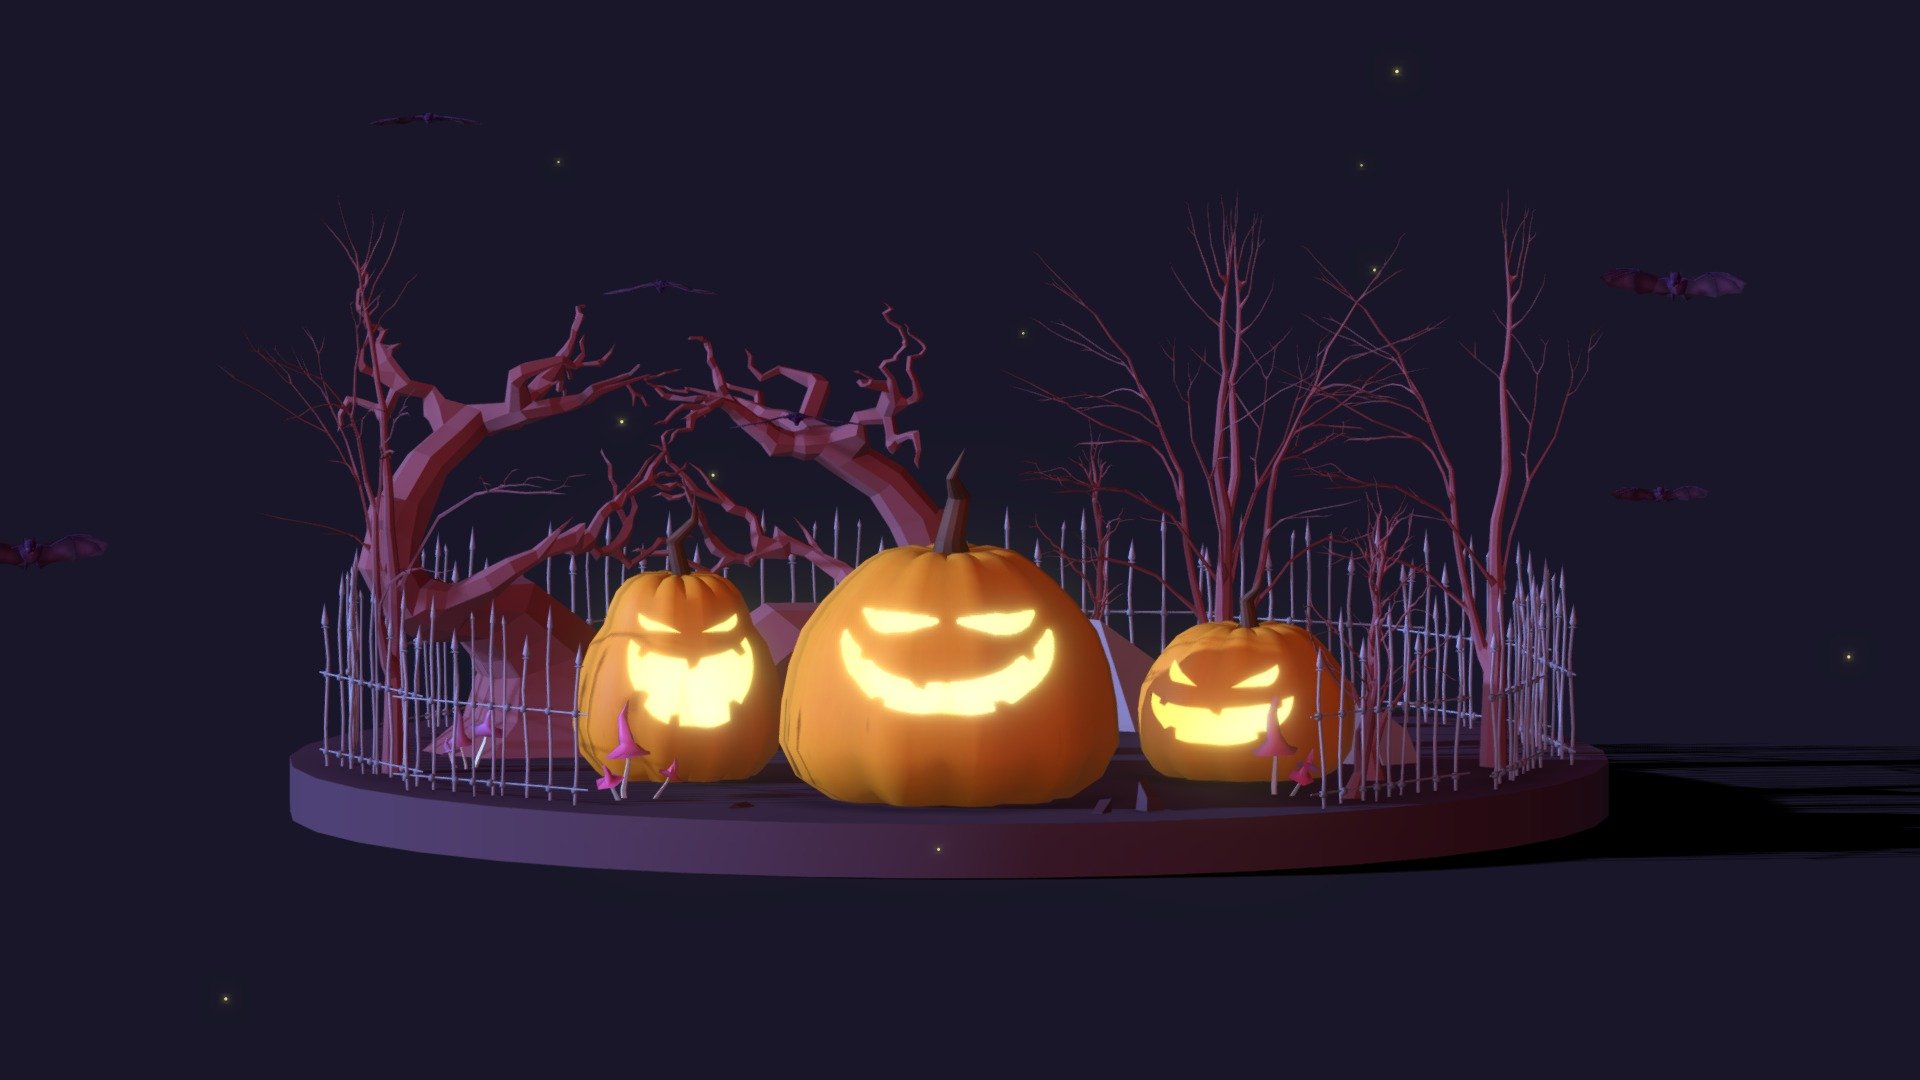 Cartoon Low Poly Halloween  3d Scene illustration pack

Created on Cinema 4d R20

40 347 Polygons

Procedural and UVW Textured

Game Ready, VR Ready

Animation Ready

Include Scene and separated objects
 - Cartoon Low Poly Helloween Pack - Buy Royalty Free 3D model by antonmoek 3d model